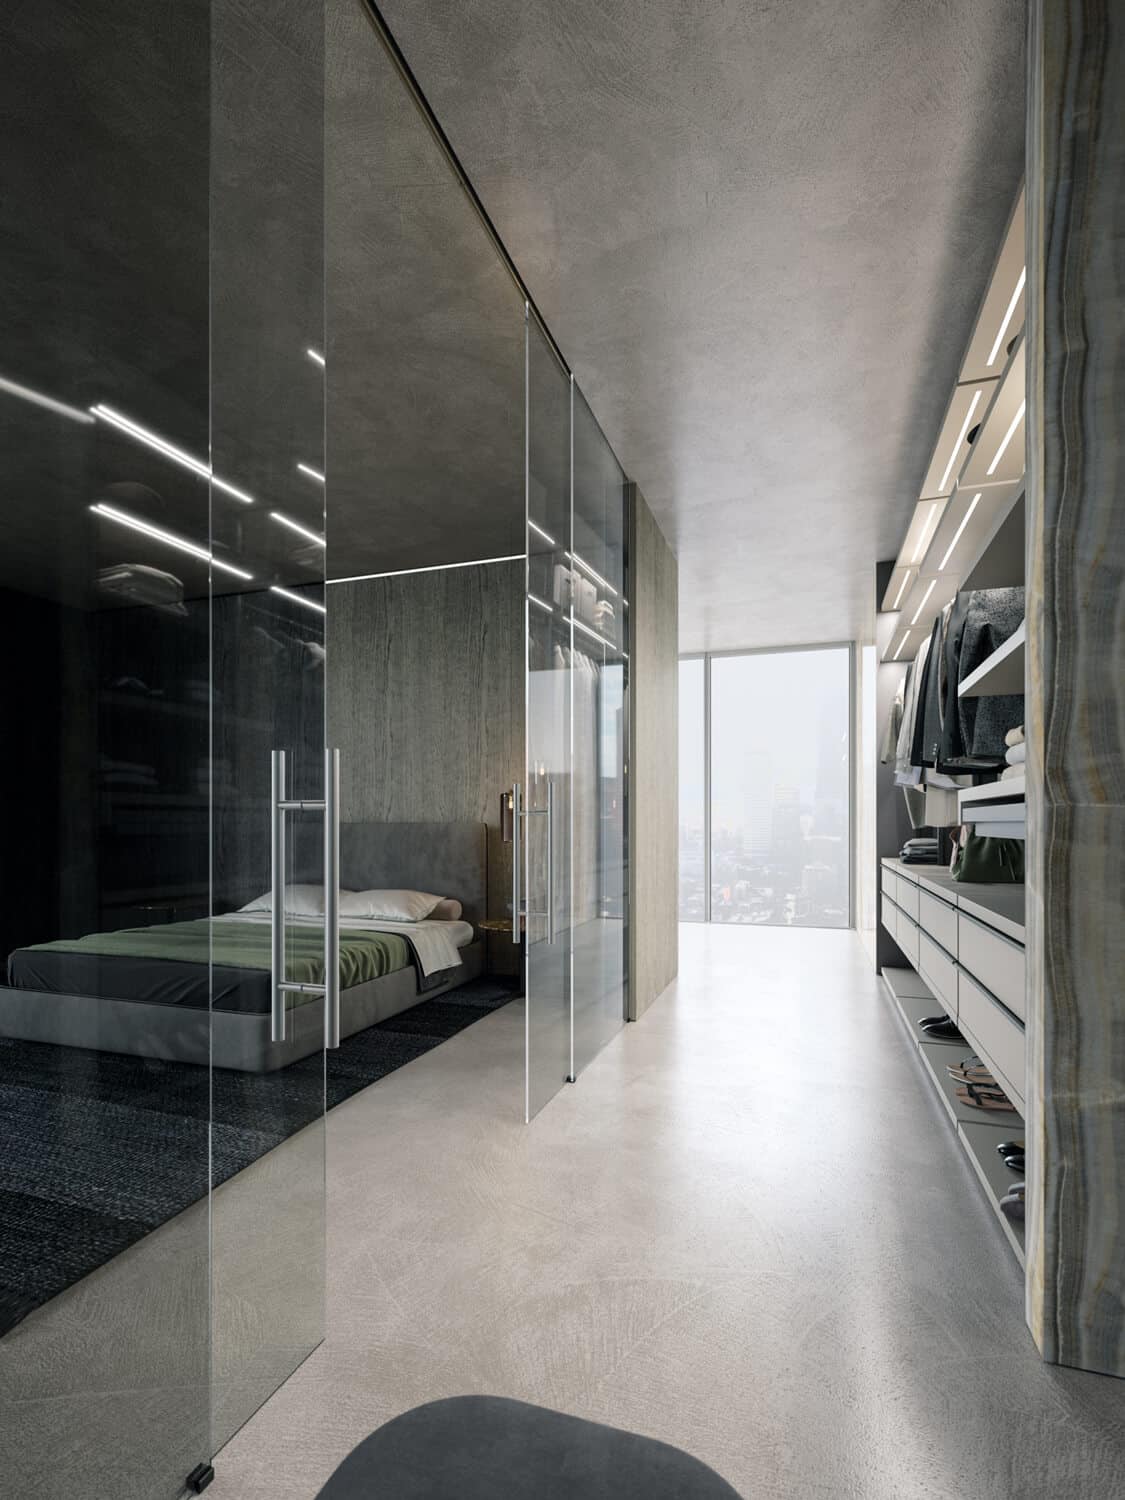 Clear grey inside-sliding doors with matching panels. An ideal solution to separate the walk-in closet while keeping it connected to the bedroom.